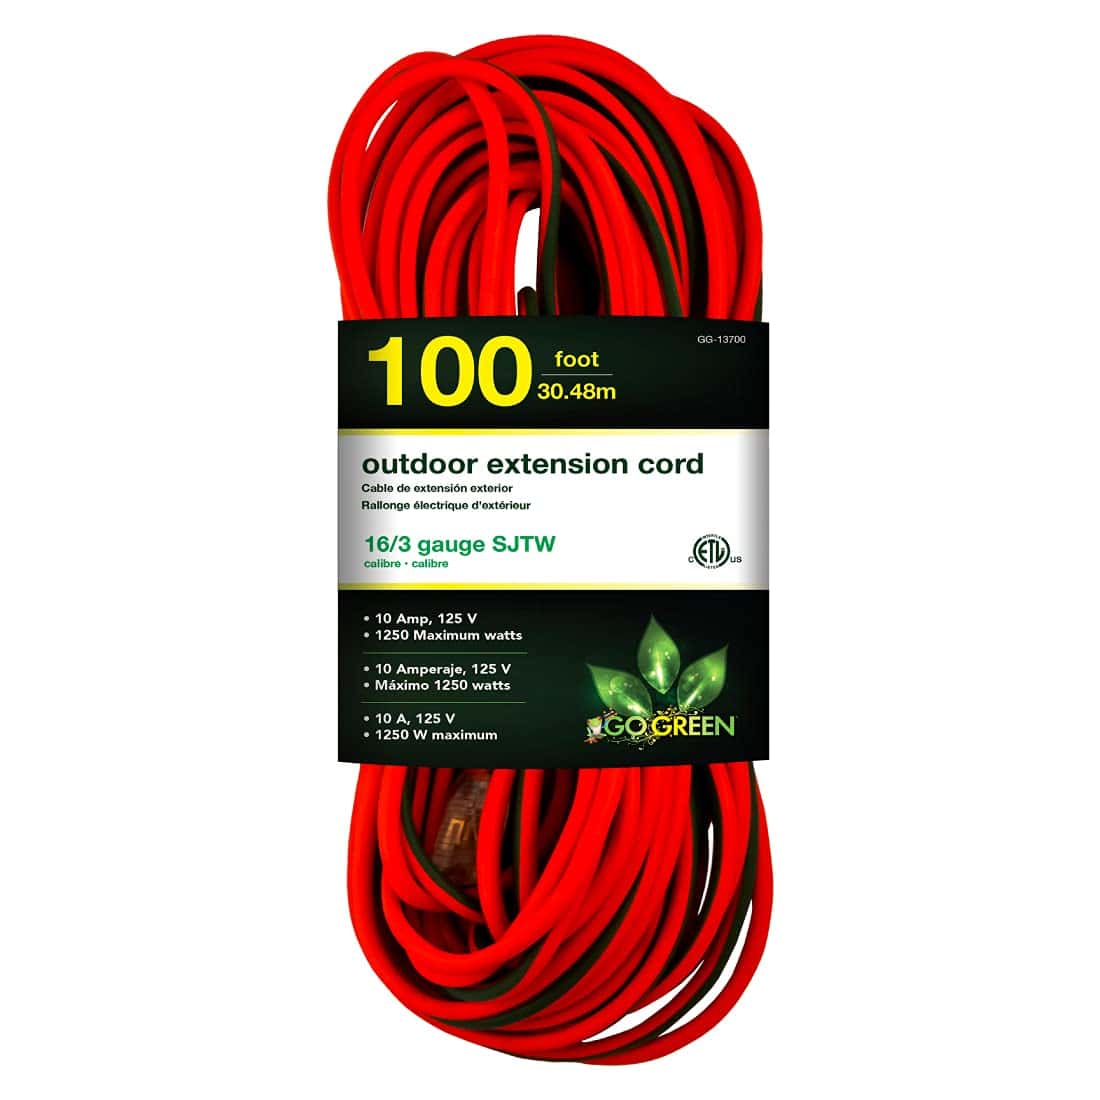 Go-Green-Power-Inc.-GG-13700-16-3-SJTW-Outdoor-Extension-Cord-Lighted-End-100-ft